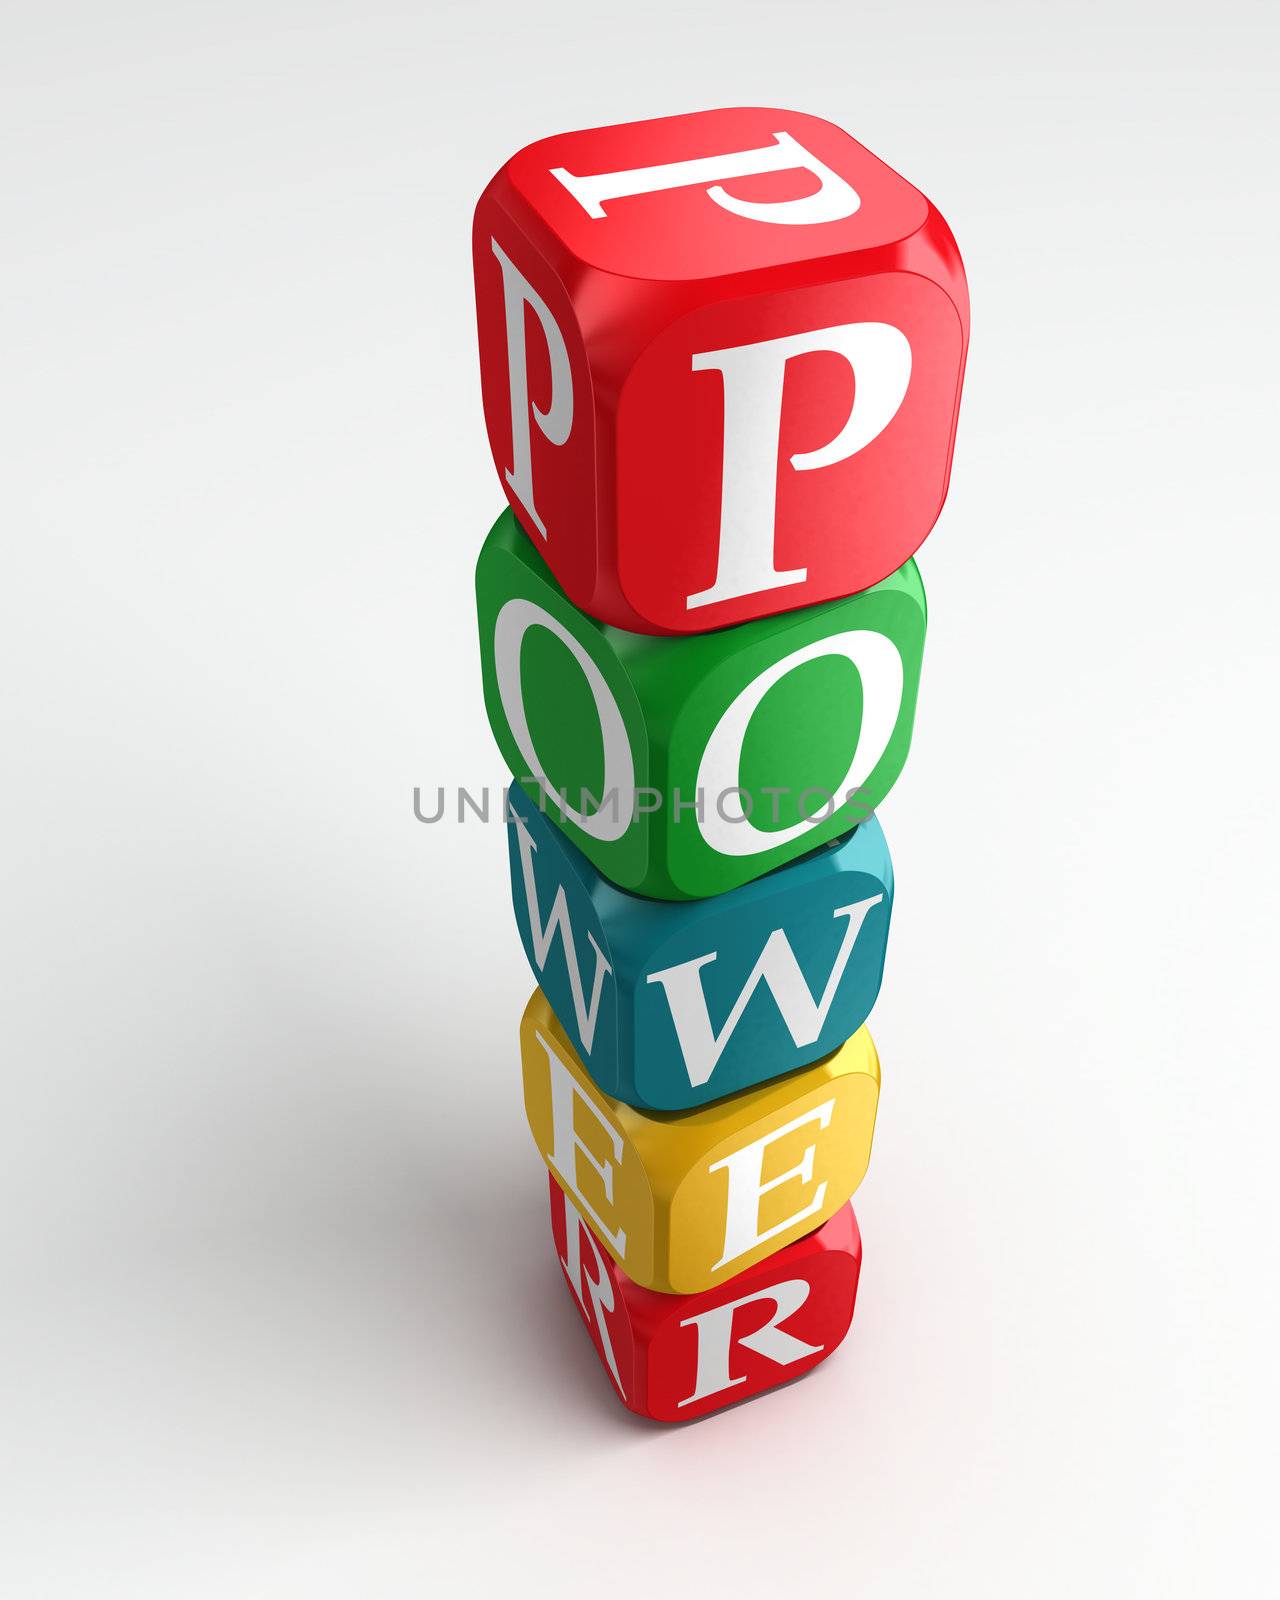 power 3d colorful buzzword dice tower on white background